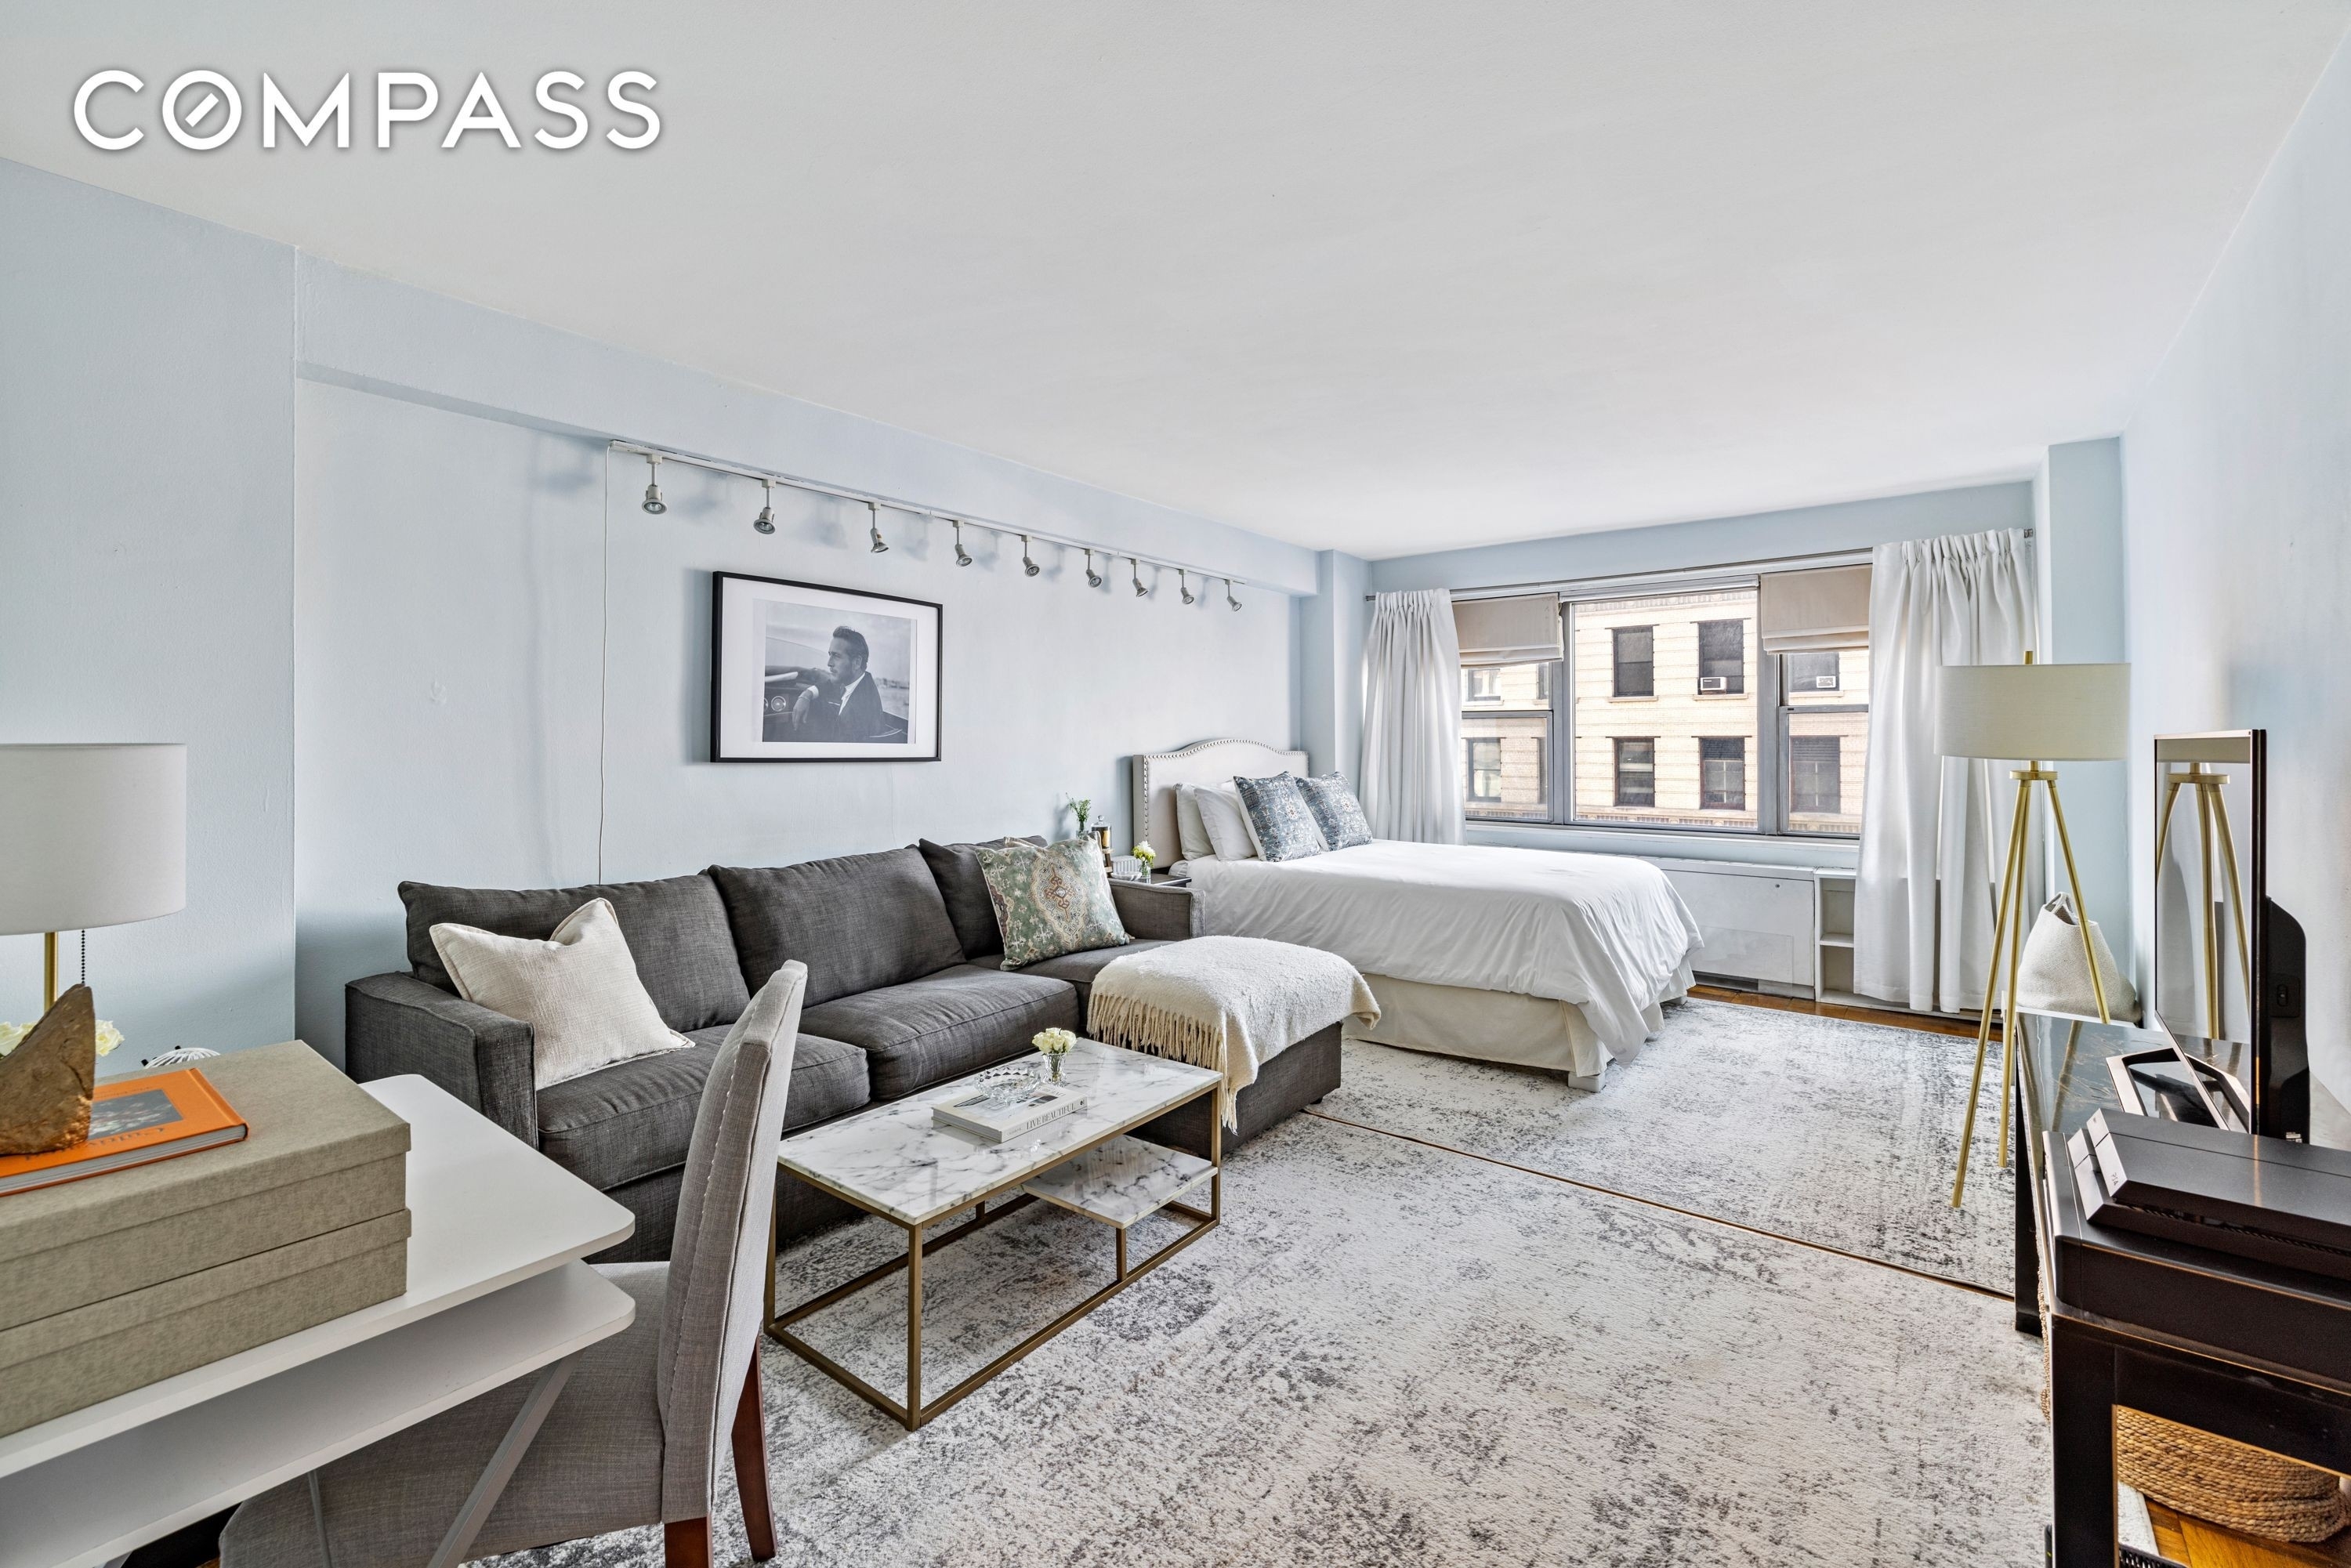 Co-op Properties for Sale at The Parker Gramercy, 10 W 15TH ST, 1526 Union Square, New York, New York 10011